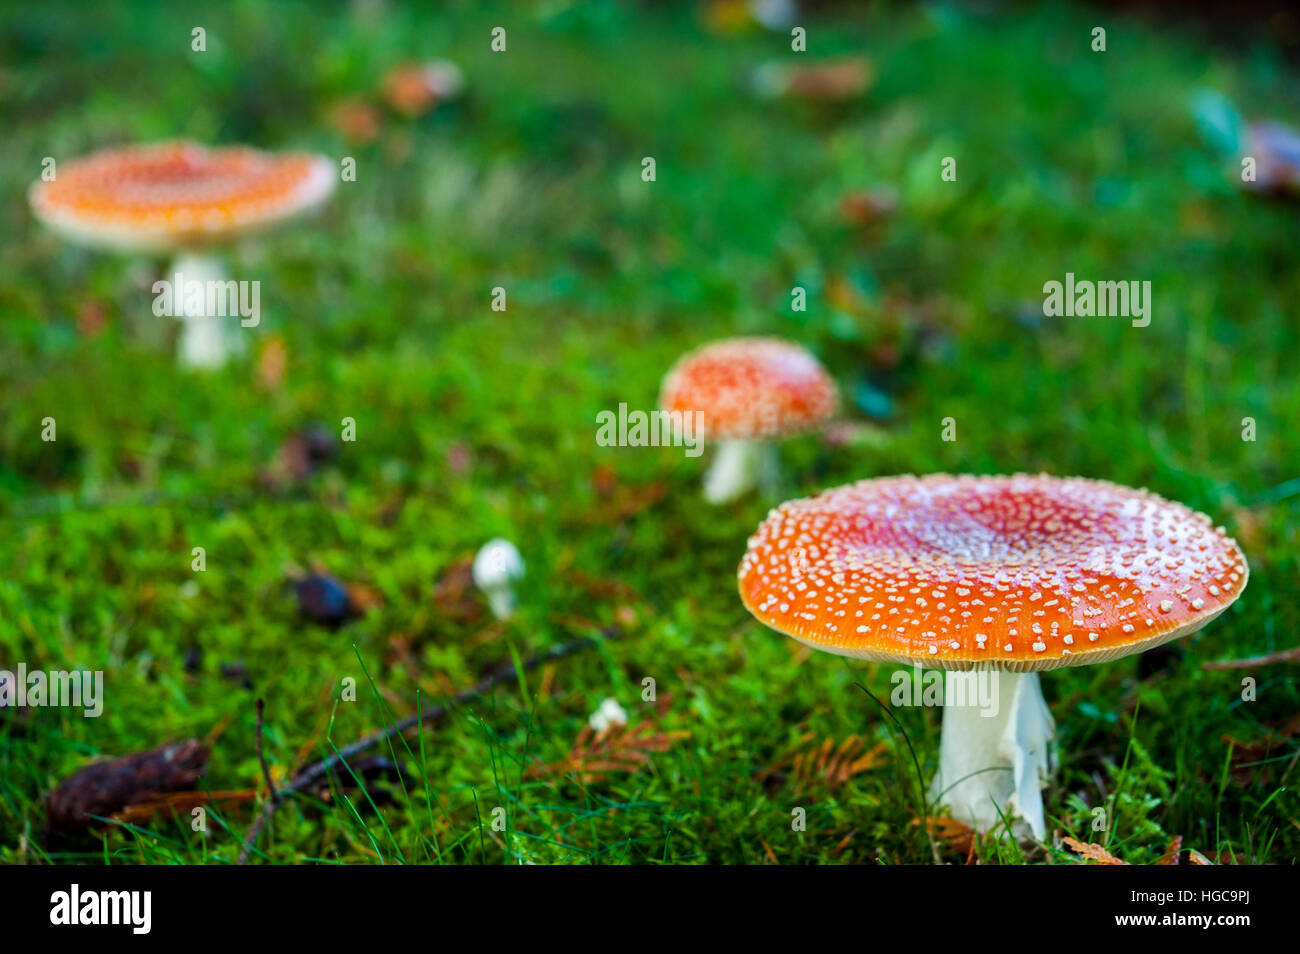 Three red and white spotted amanita muscaria or fly agaric mushrooms, toxic psychoactive hallucinogenic fungi growing on grass Stock Photo